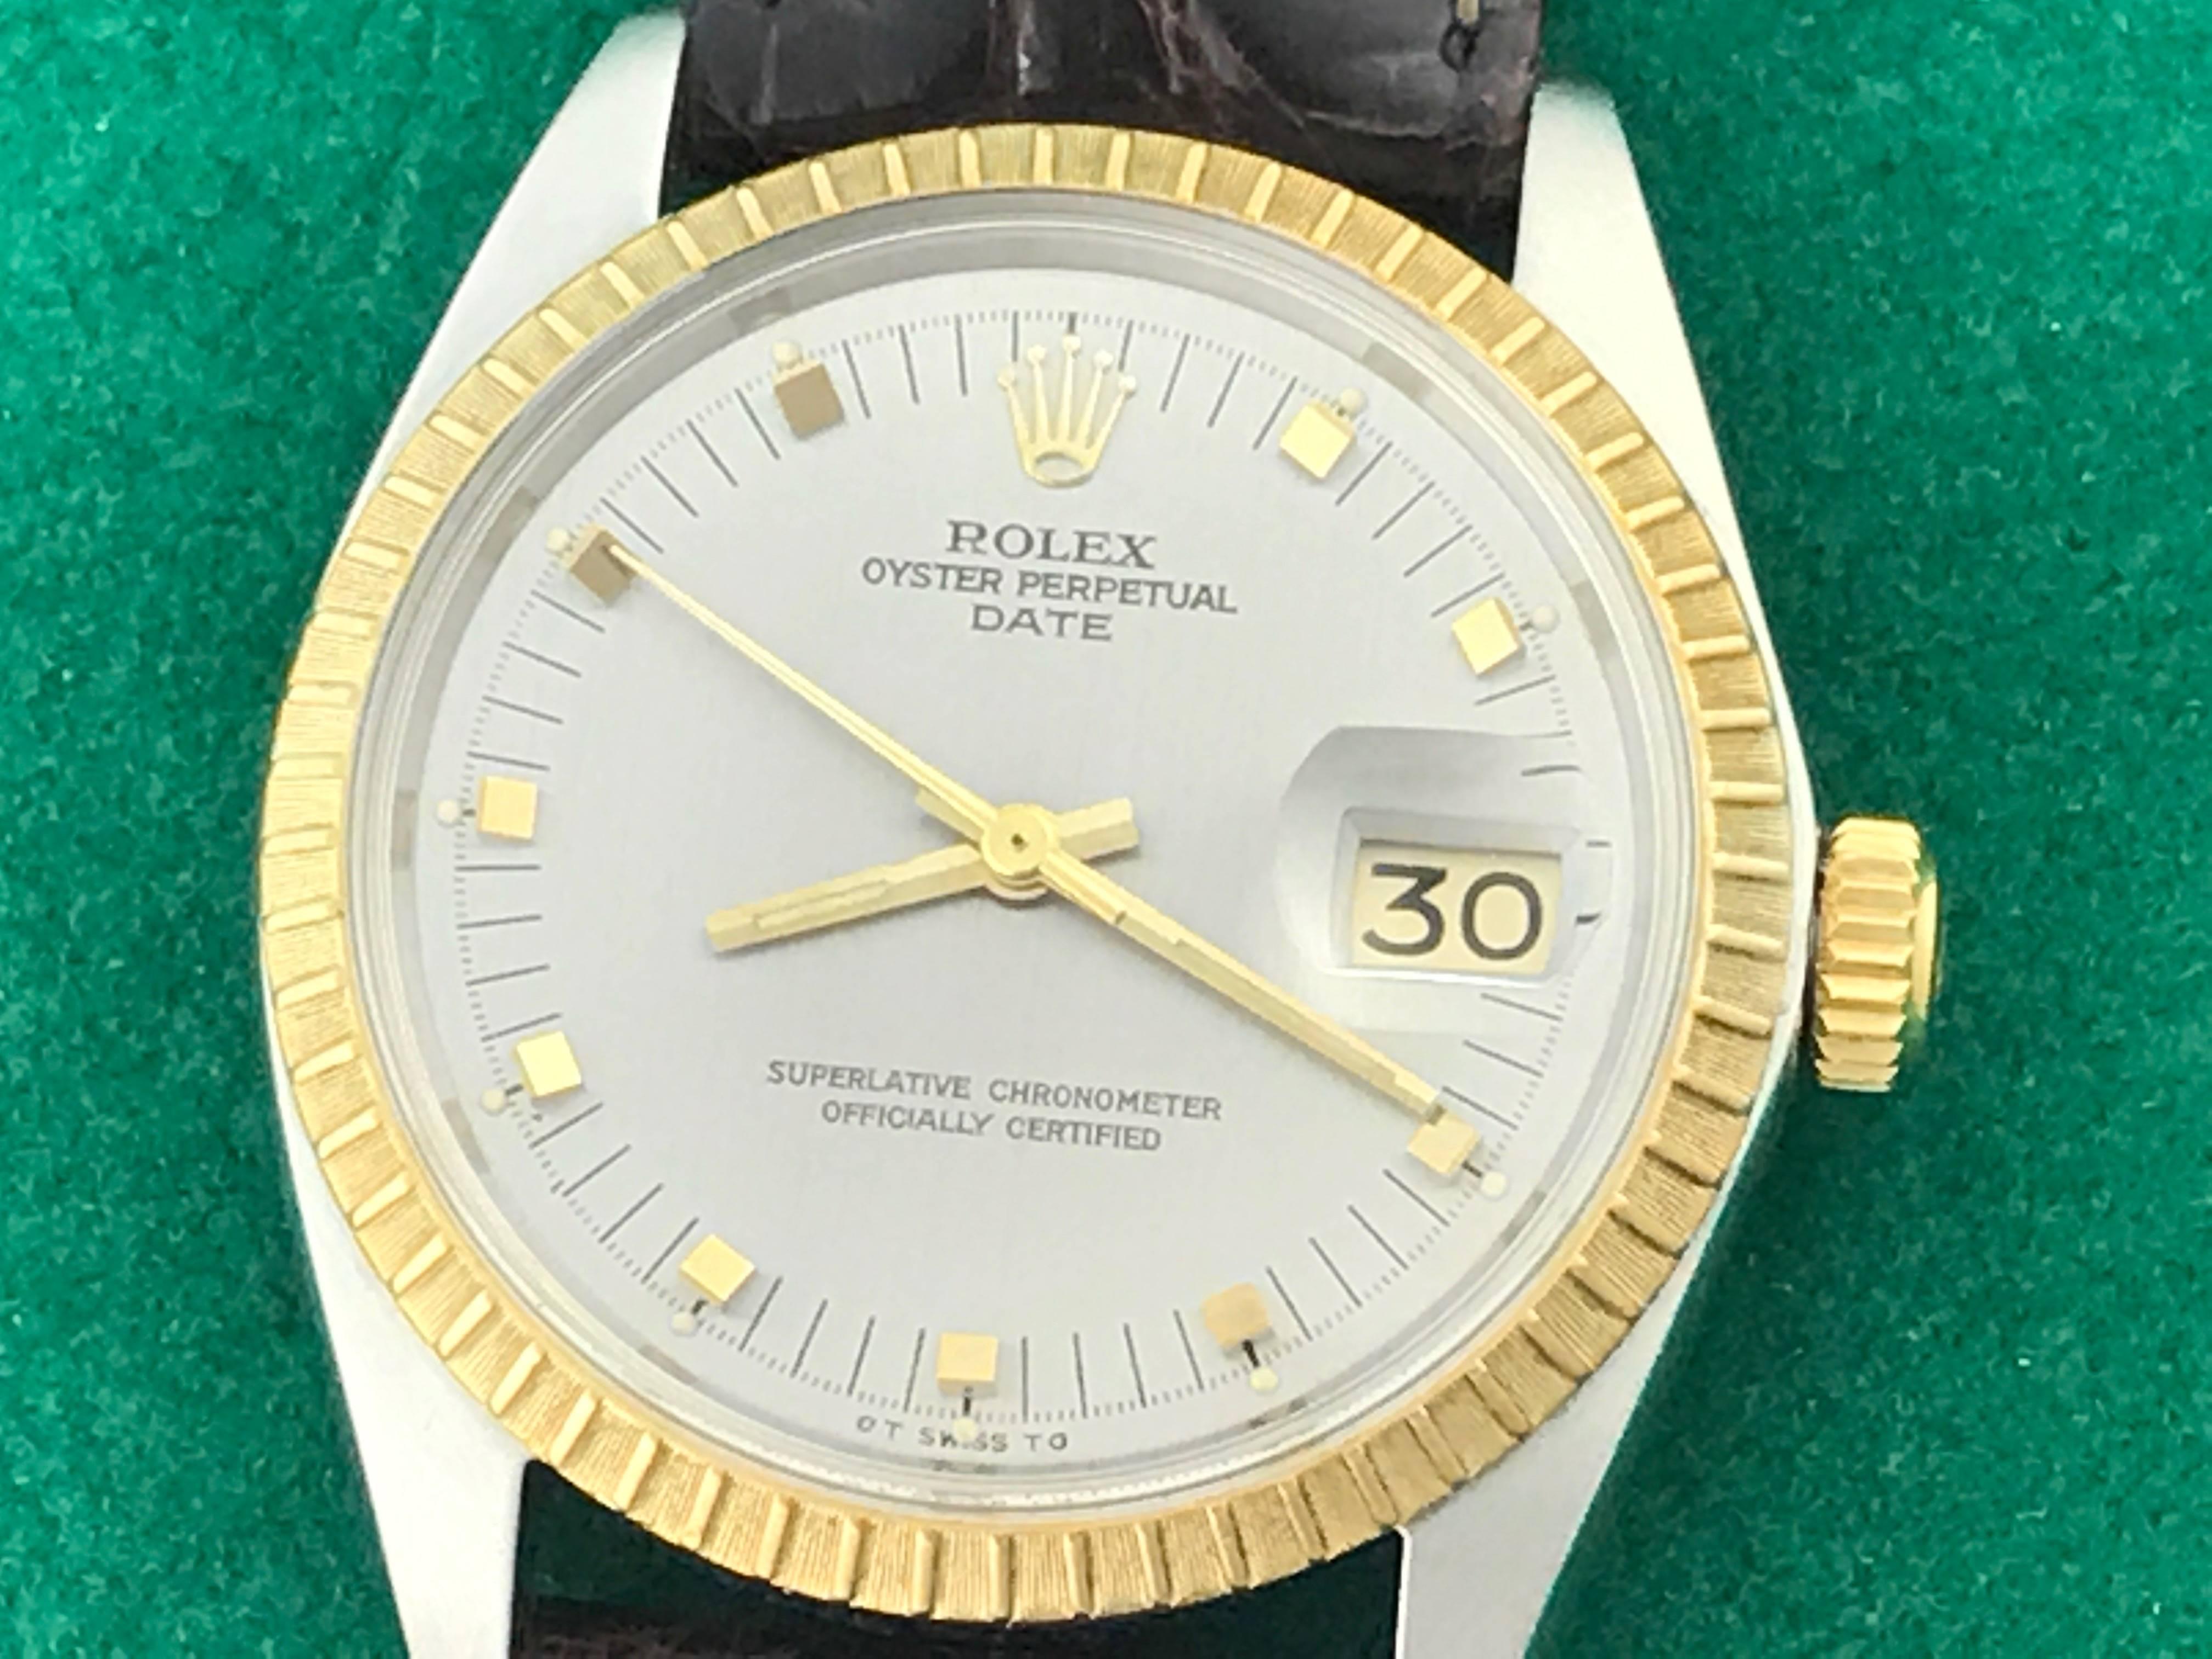 The Rolex Date Model 15053 Mens automatic wrist watch. Featuring a silvered dial with yellow gold hour markers and stainless steel case with 18k yellow gold engine-turned bezel. Measures 34mm. Comes with a dark brown alligator strap, box,